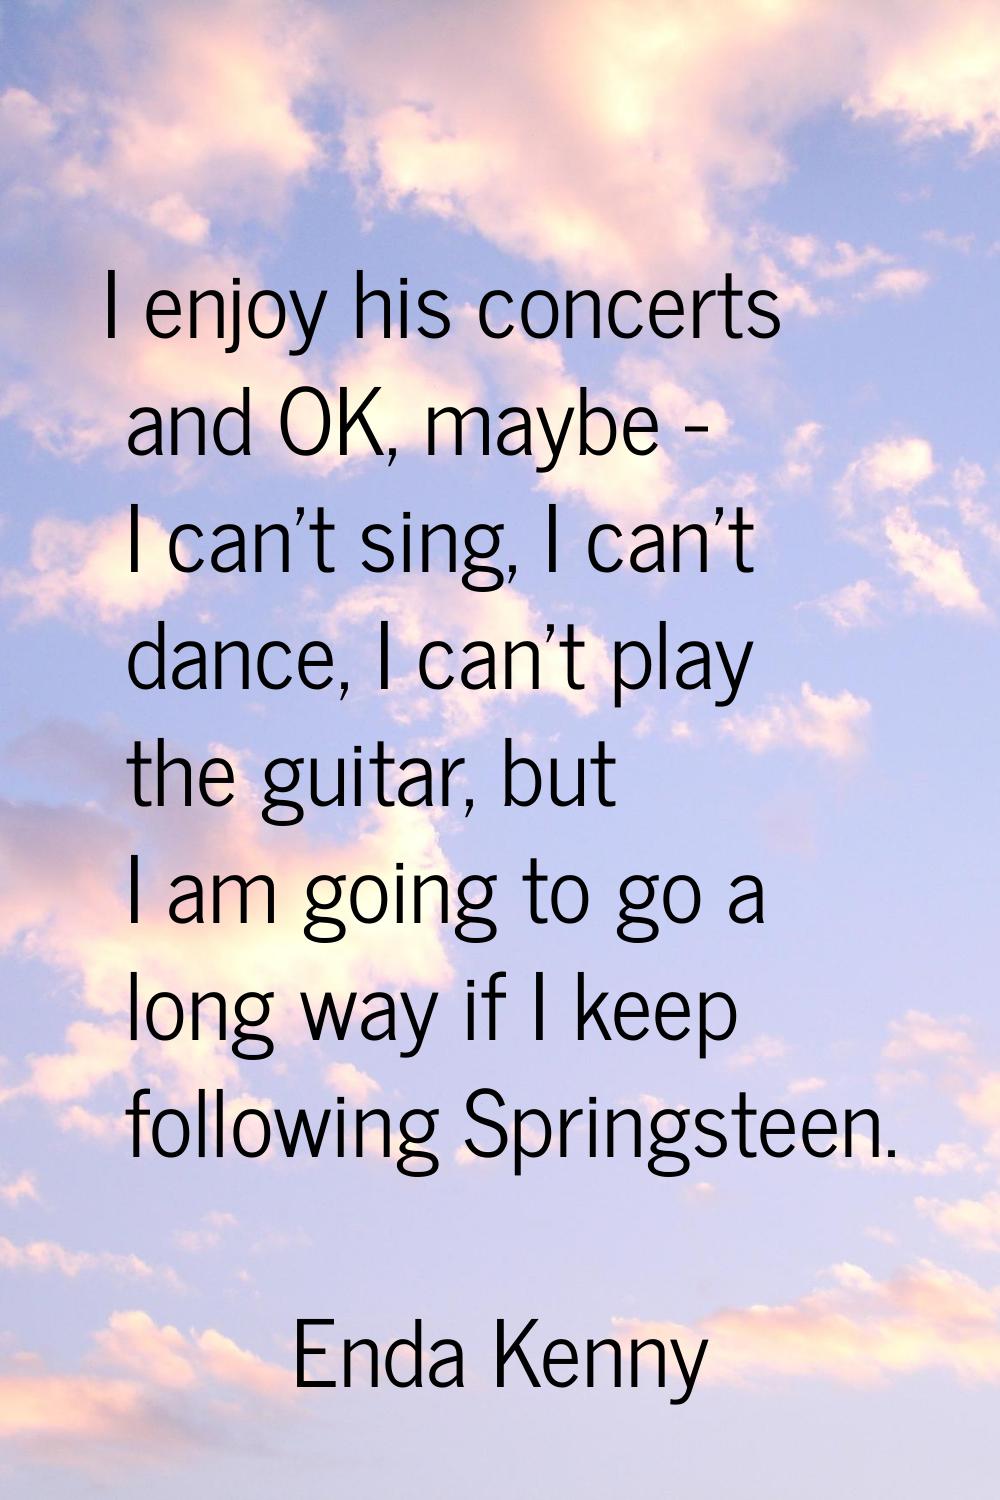 I enjoy his concerts and OK, maybe - I can't sing, I can't dance, I can't play the guitar, but I am